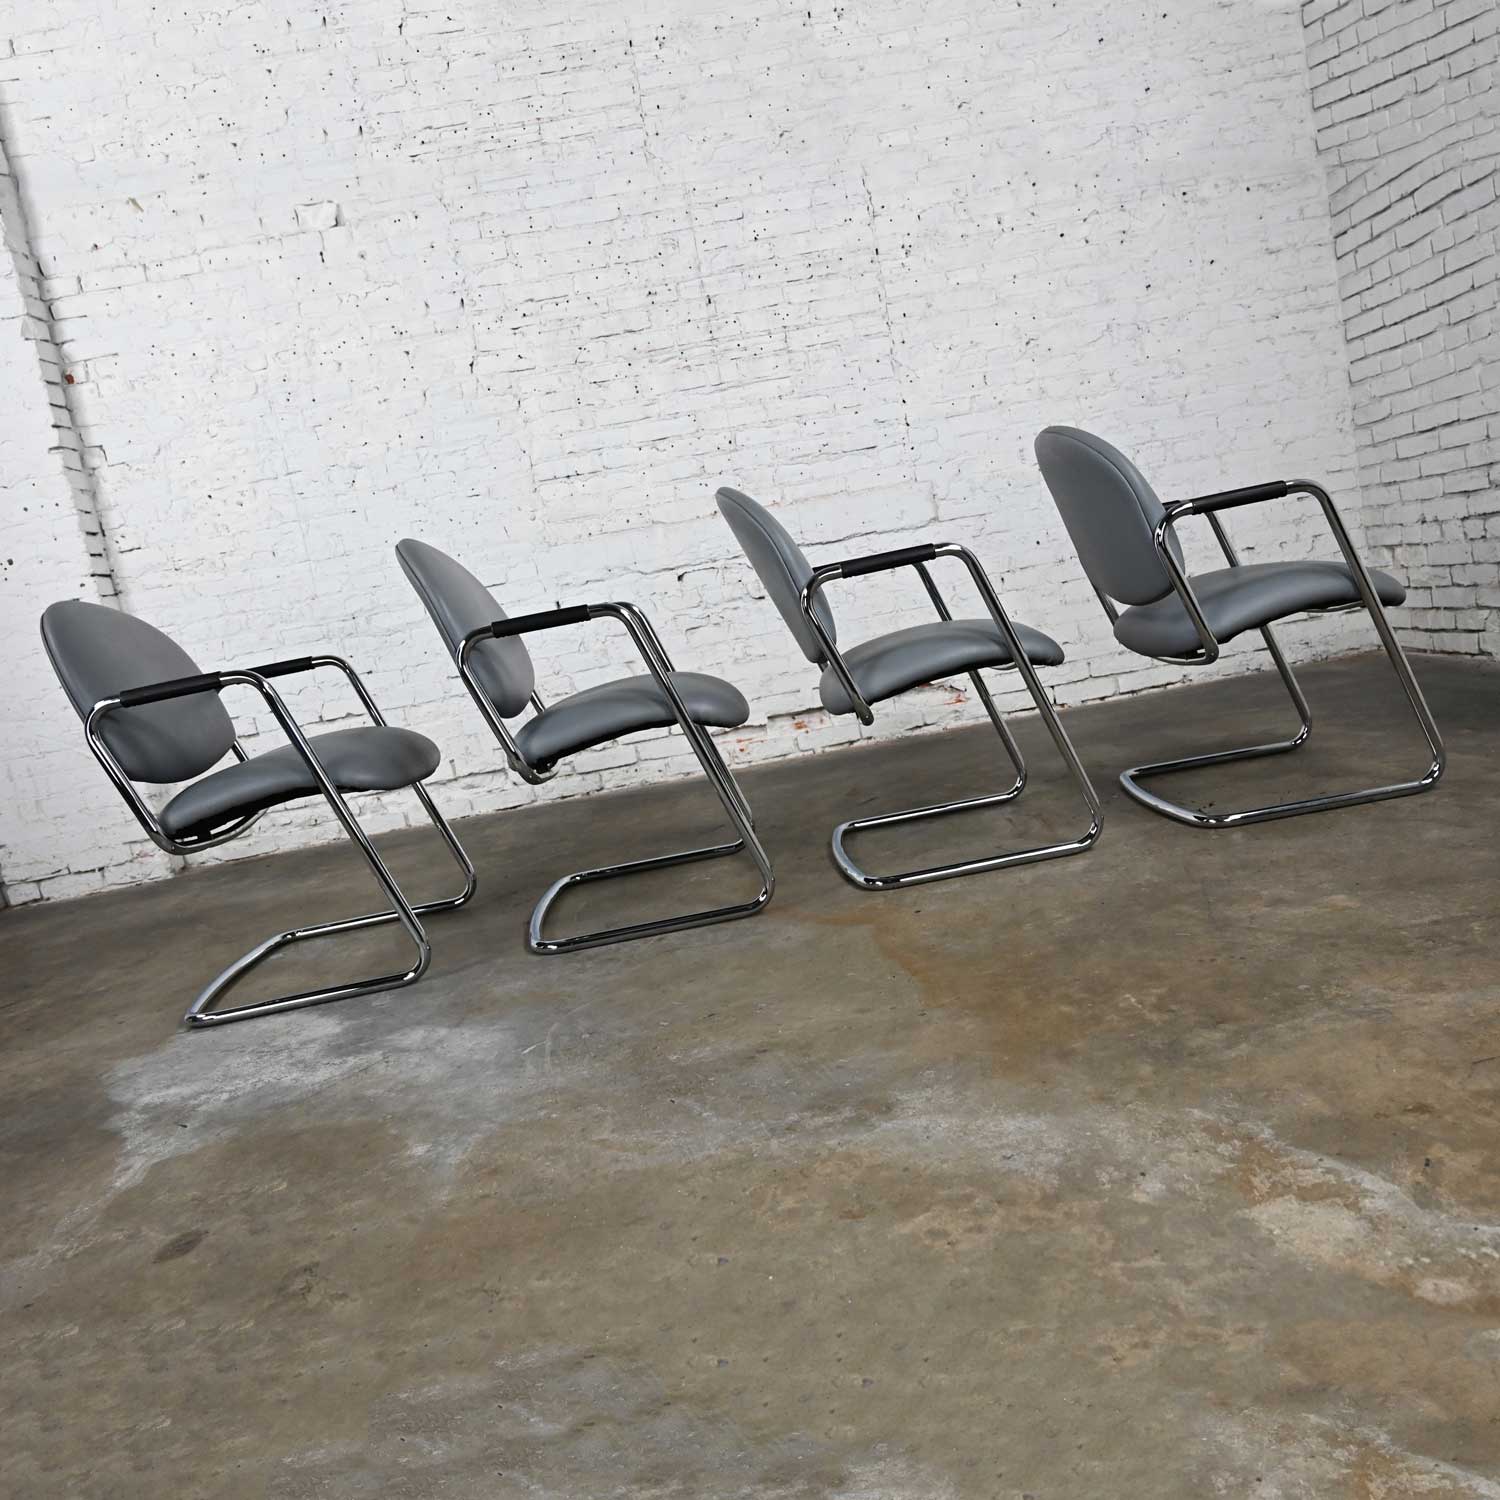 Vintage Modern Steelcase Chrome Tube Cantilever Base & Gray Faux Leather Chairs set of 4